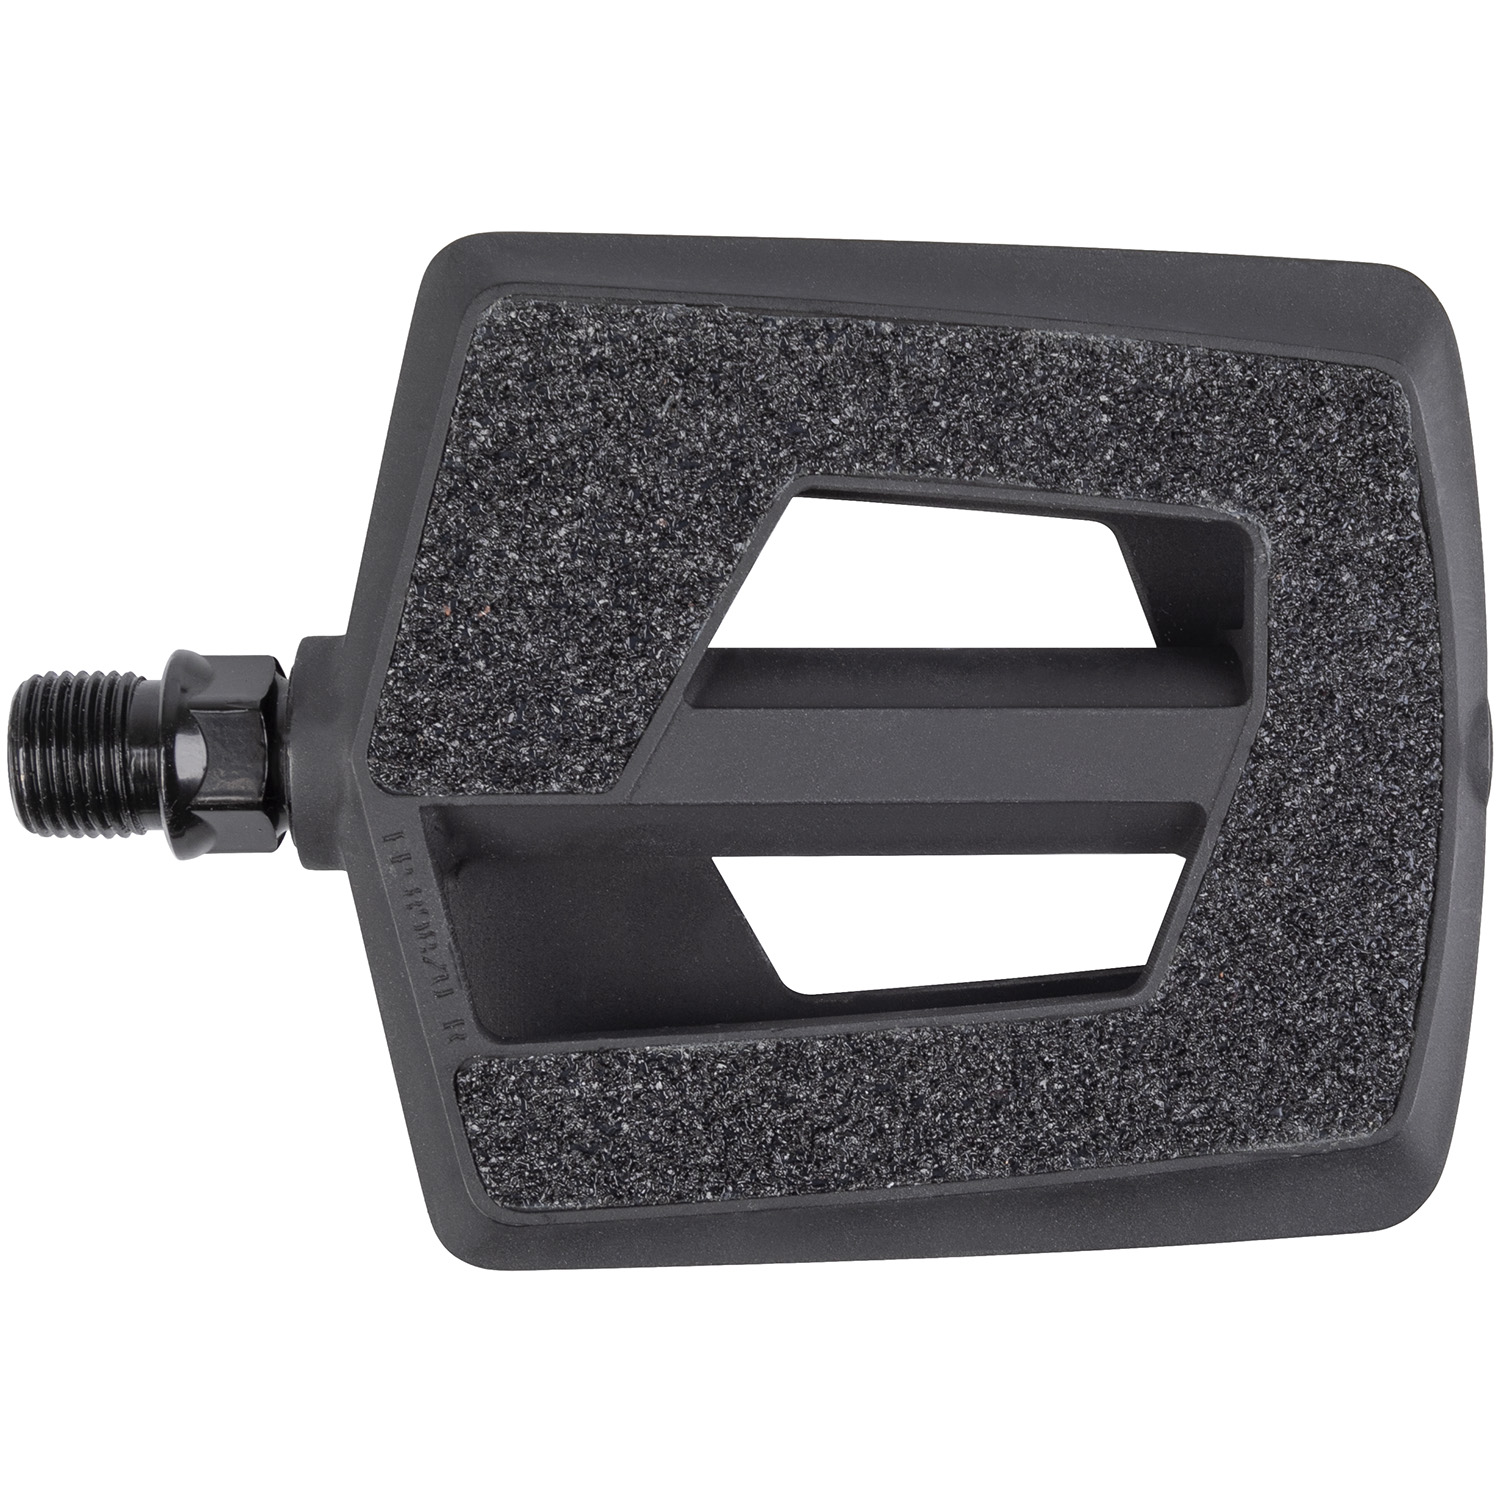 Pedales Steady Flat antiresbalizante pedal 9/16 con reflectores, negro